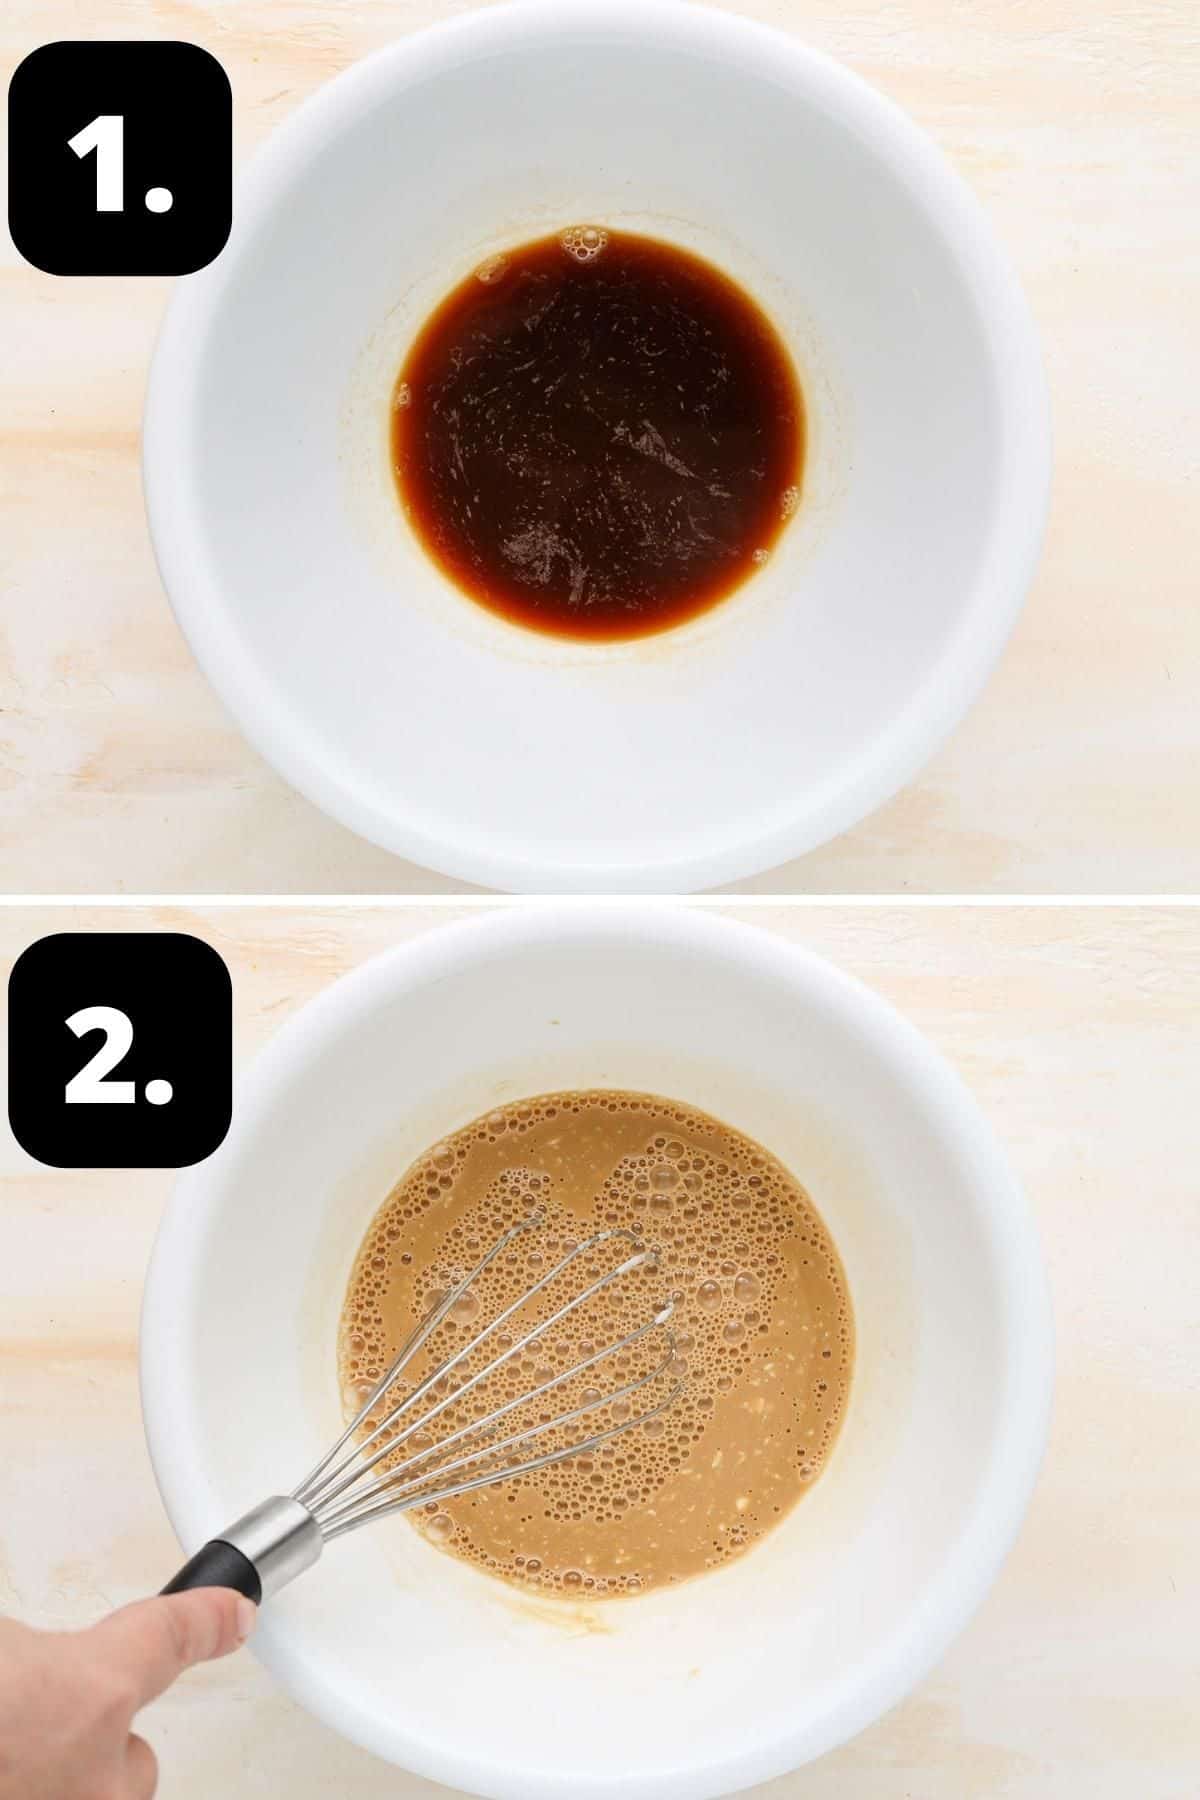 Steps 1-2 of preparing this recipe - the espresso coffee in a white bowl, and mixing the coffee together with the milk and maple syrup.